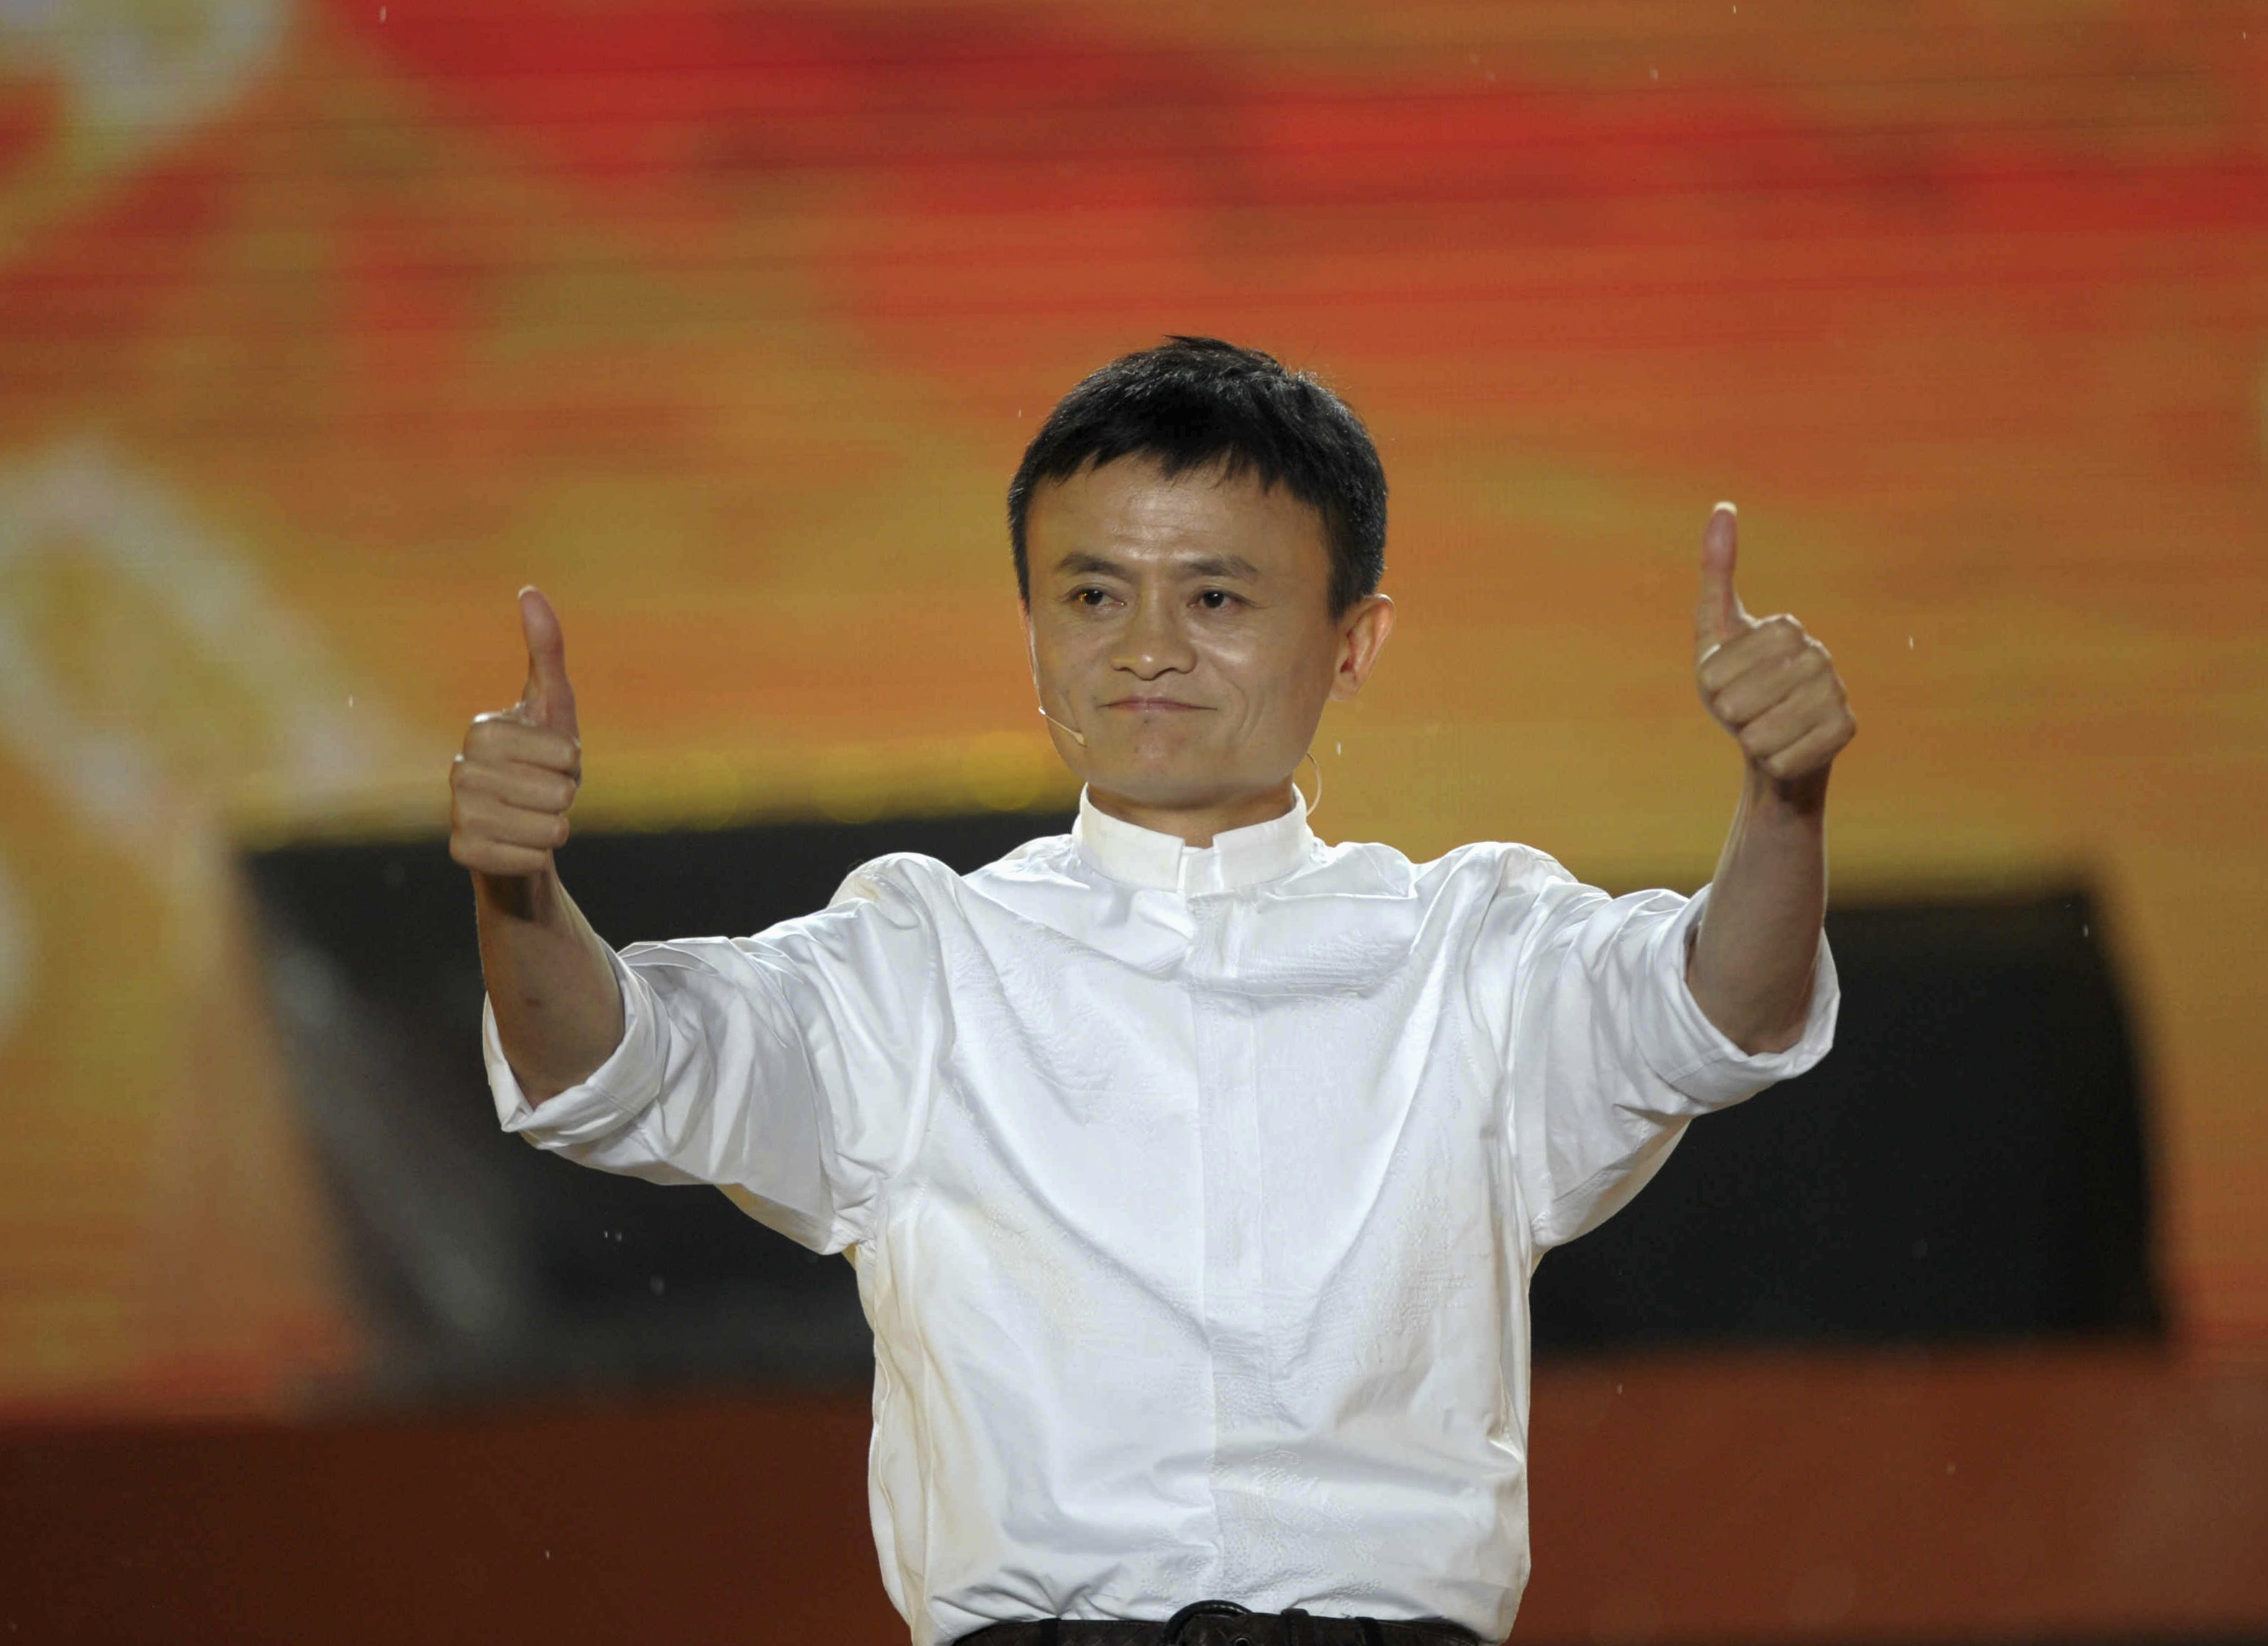 Alibaba founder Jack Ma gestures during a celebration of the 10th anniversary of Taobao Marketplace, China's largest consumer-focused e-commerce website, in Hangzhou, May 10, 2013. (China Daily/Reuters)